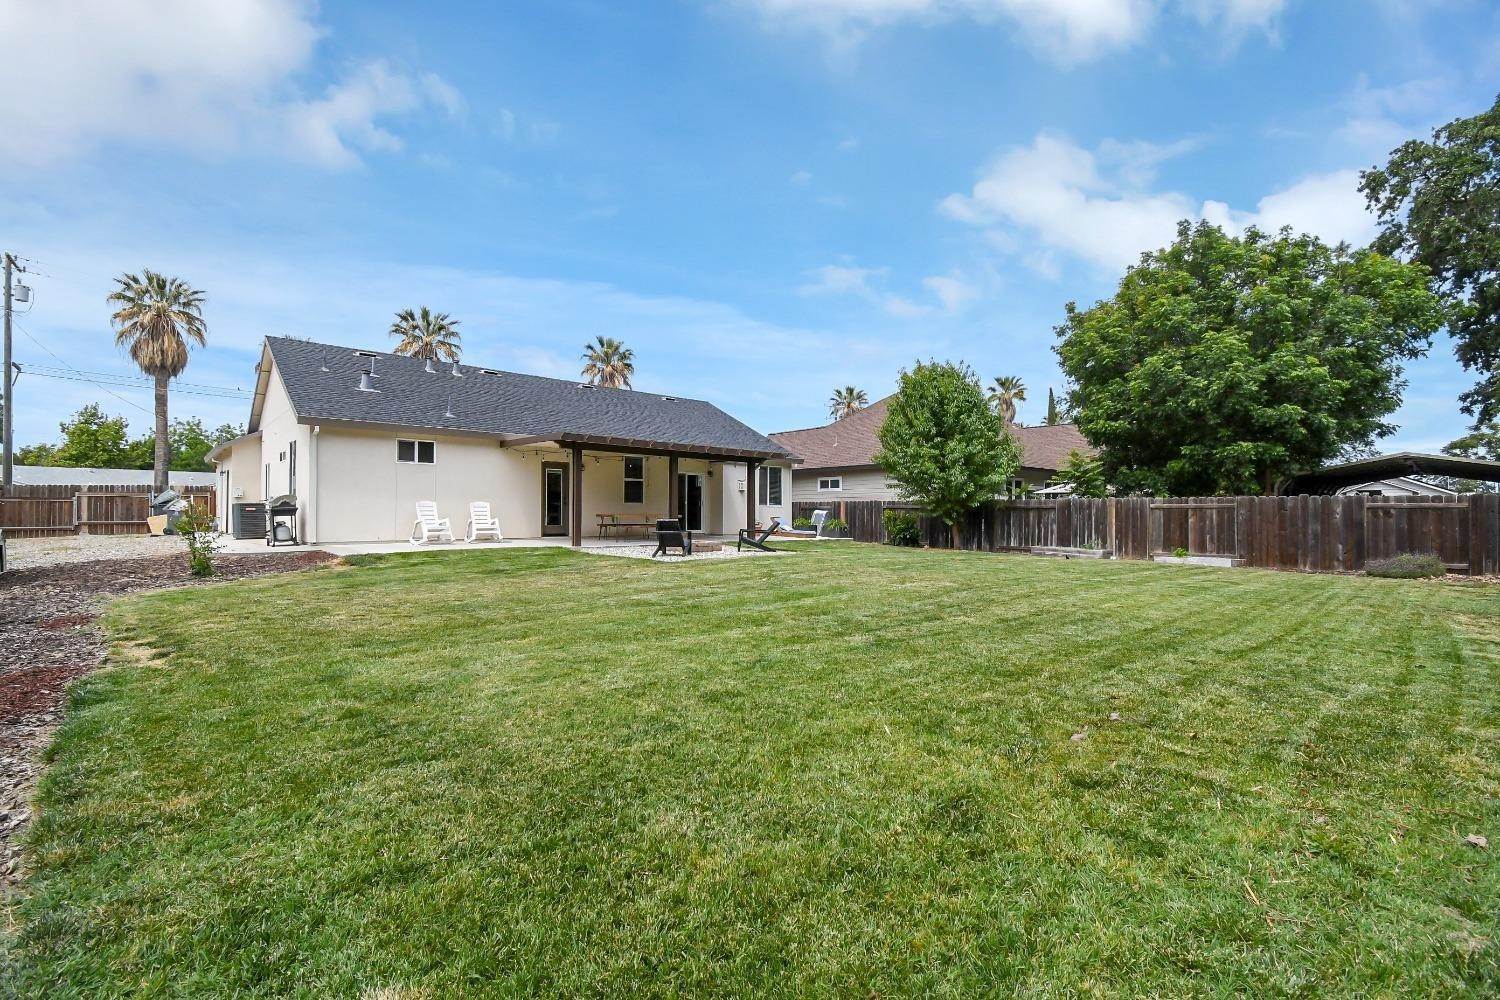 41. Single Family Homes for Active at 2071 Palm Street Sutter, California 95982 United States